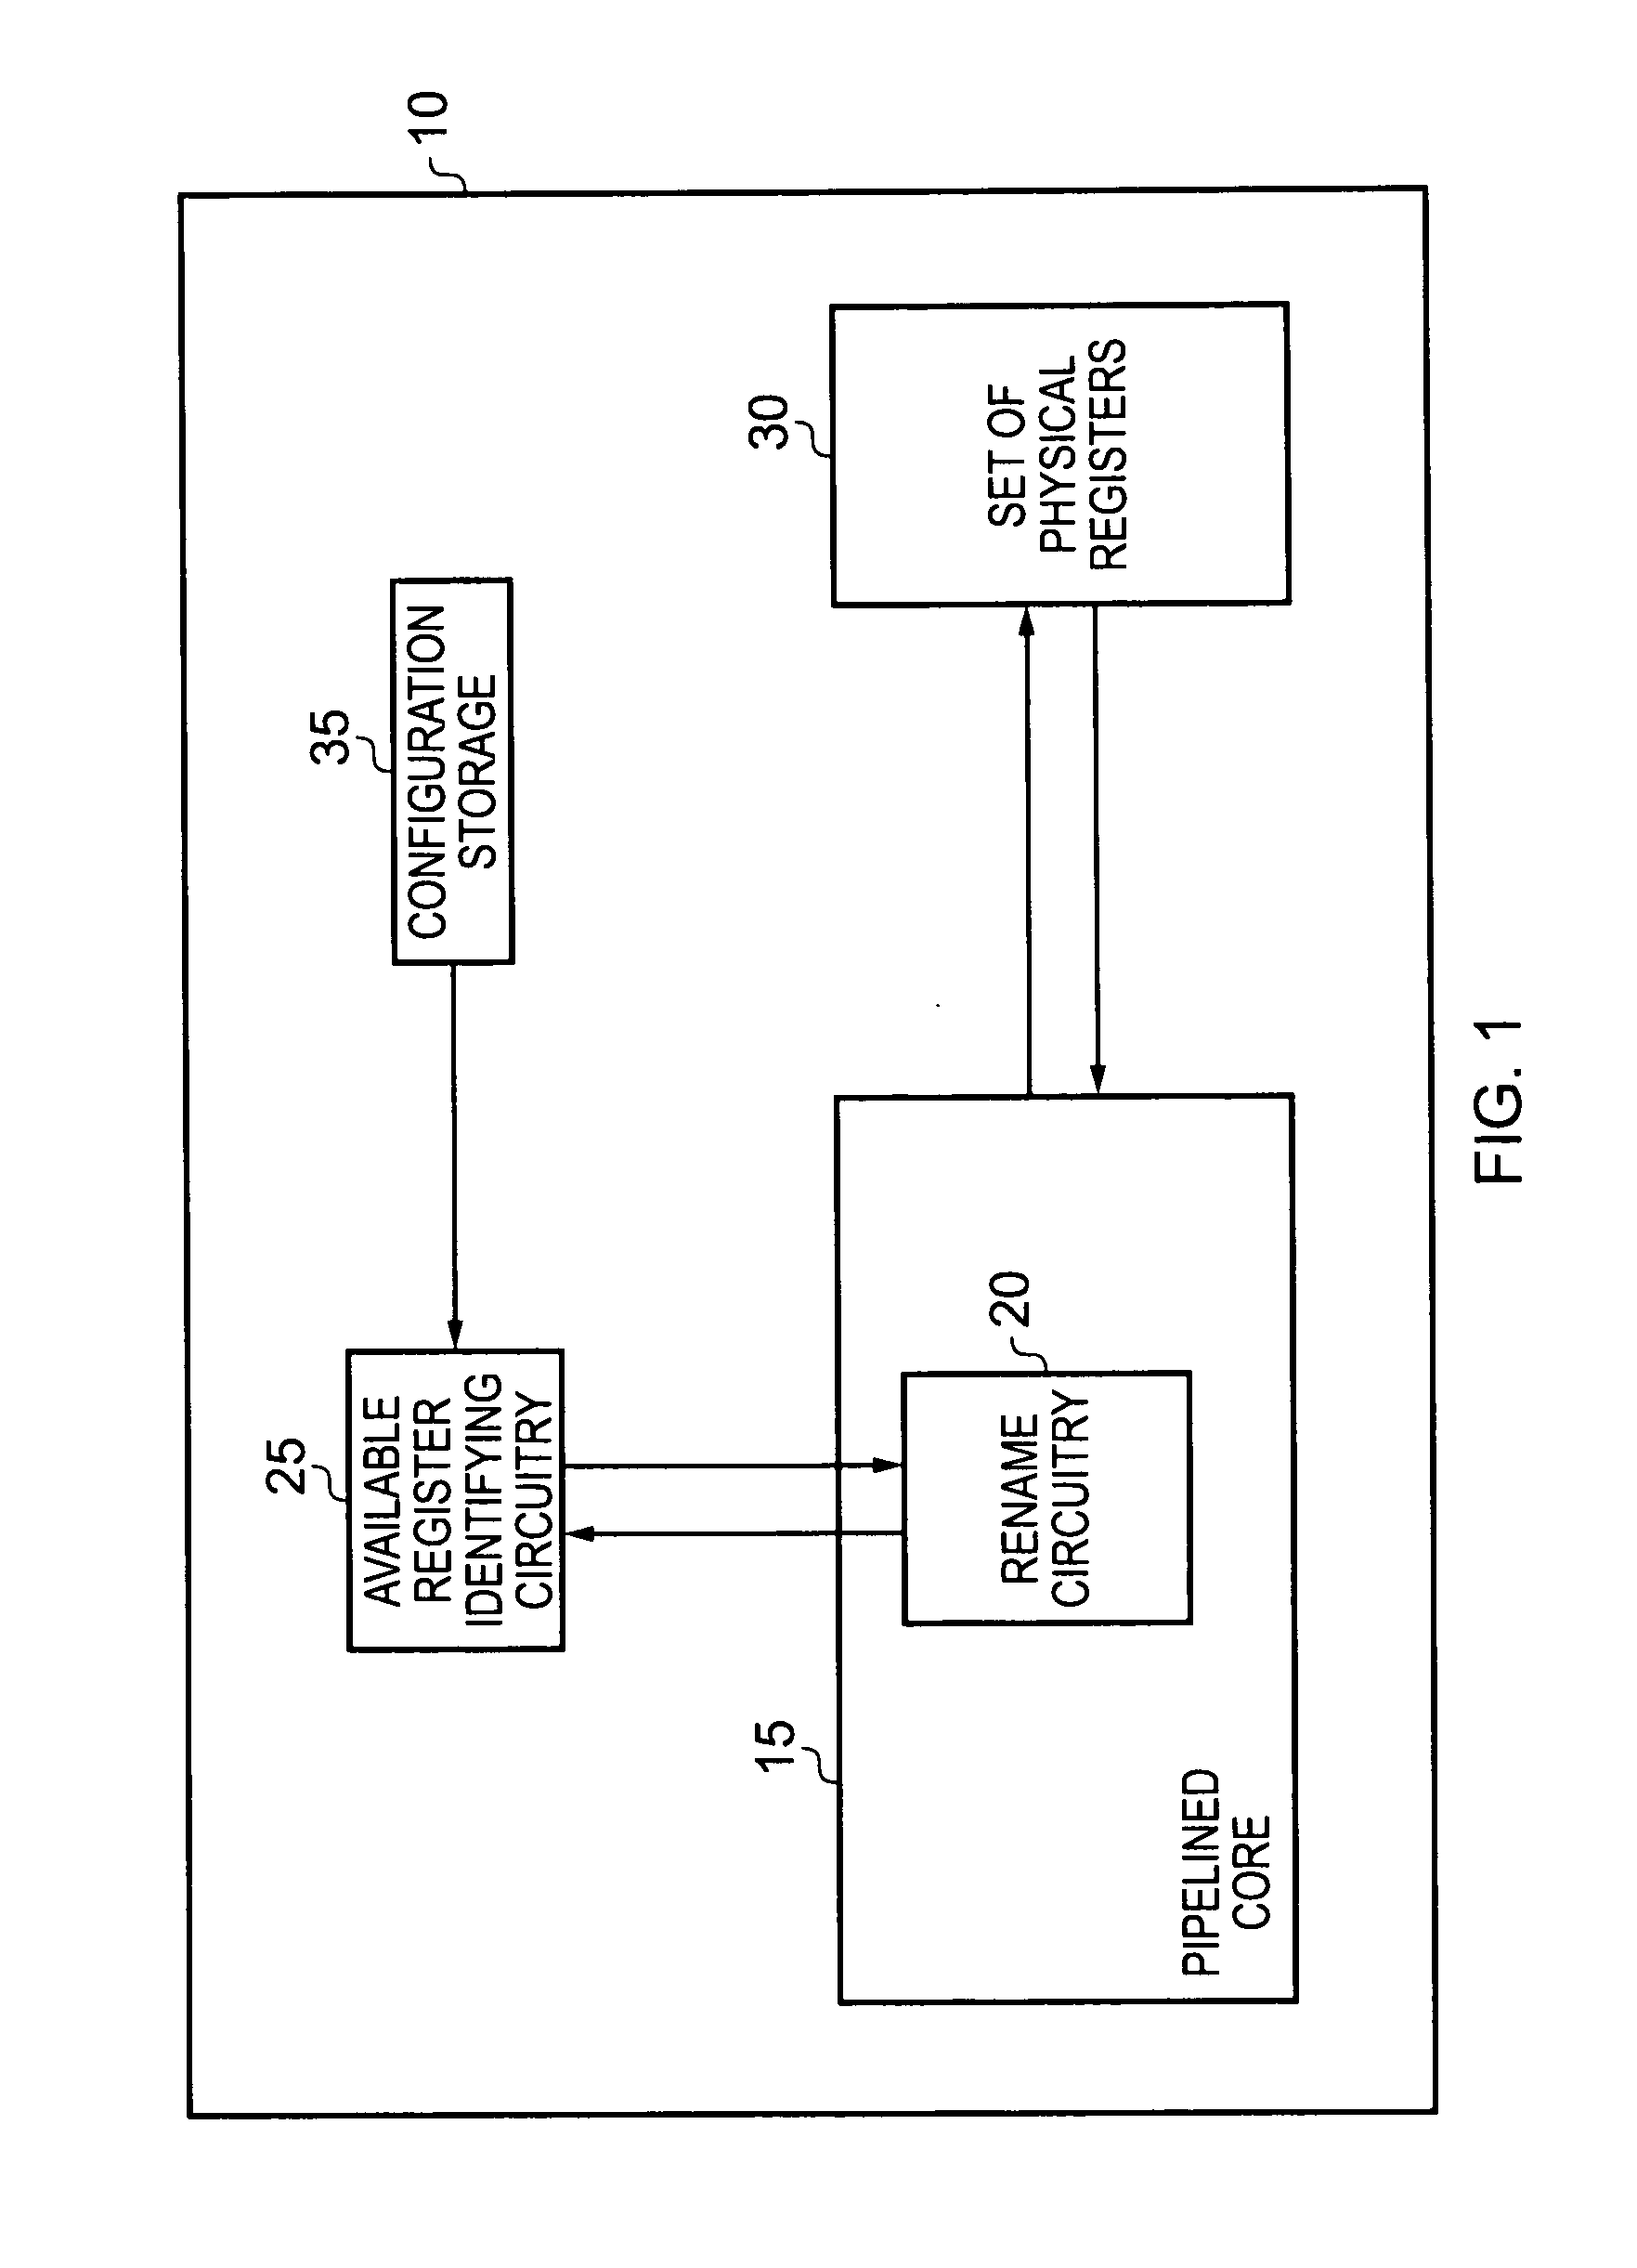 Apparatus and method for mapping architectural registers to physical registers